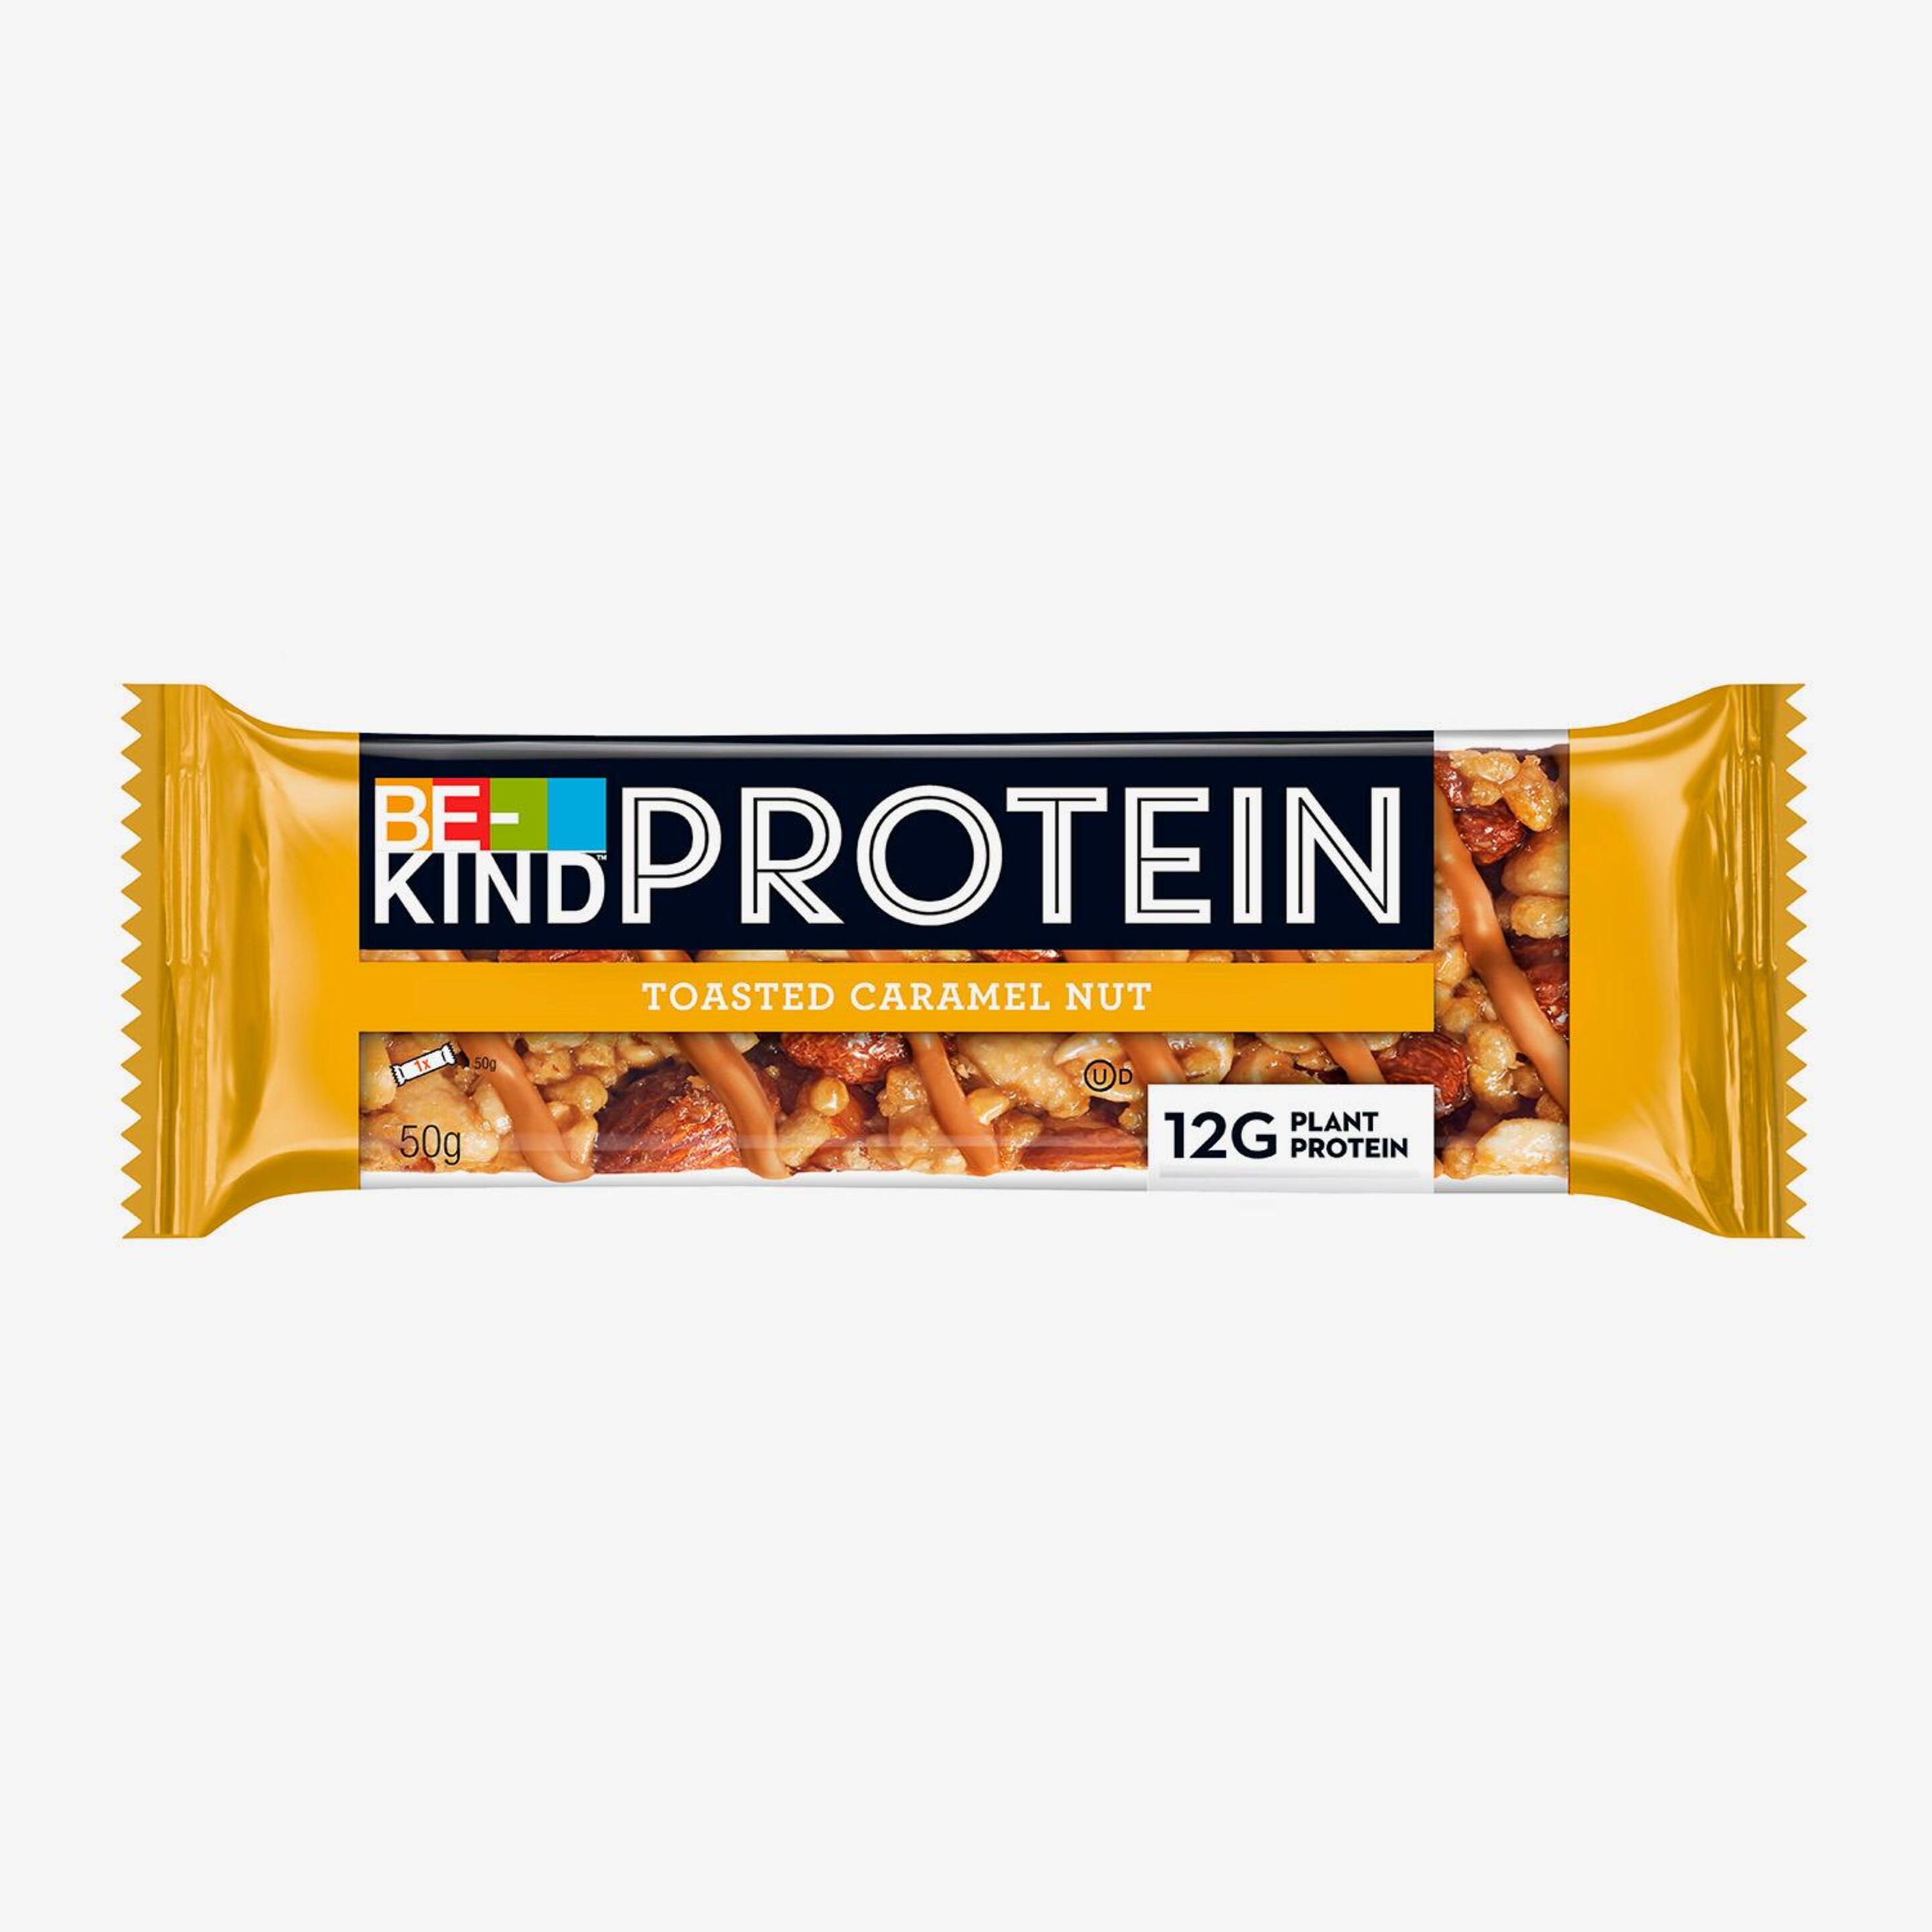 Be-kind Protein Caramelo 50g